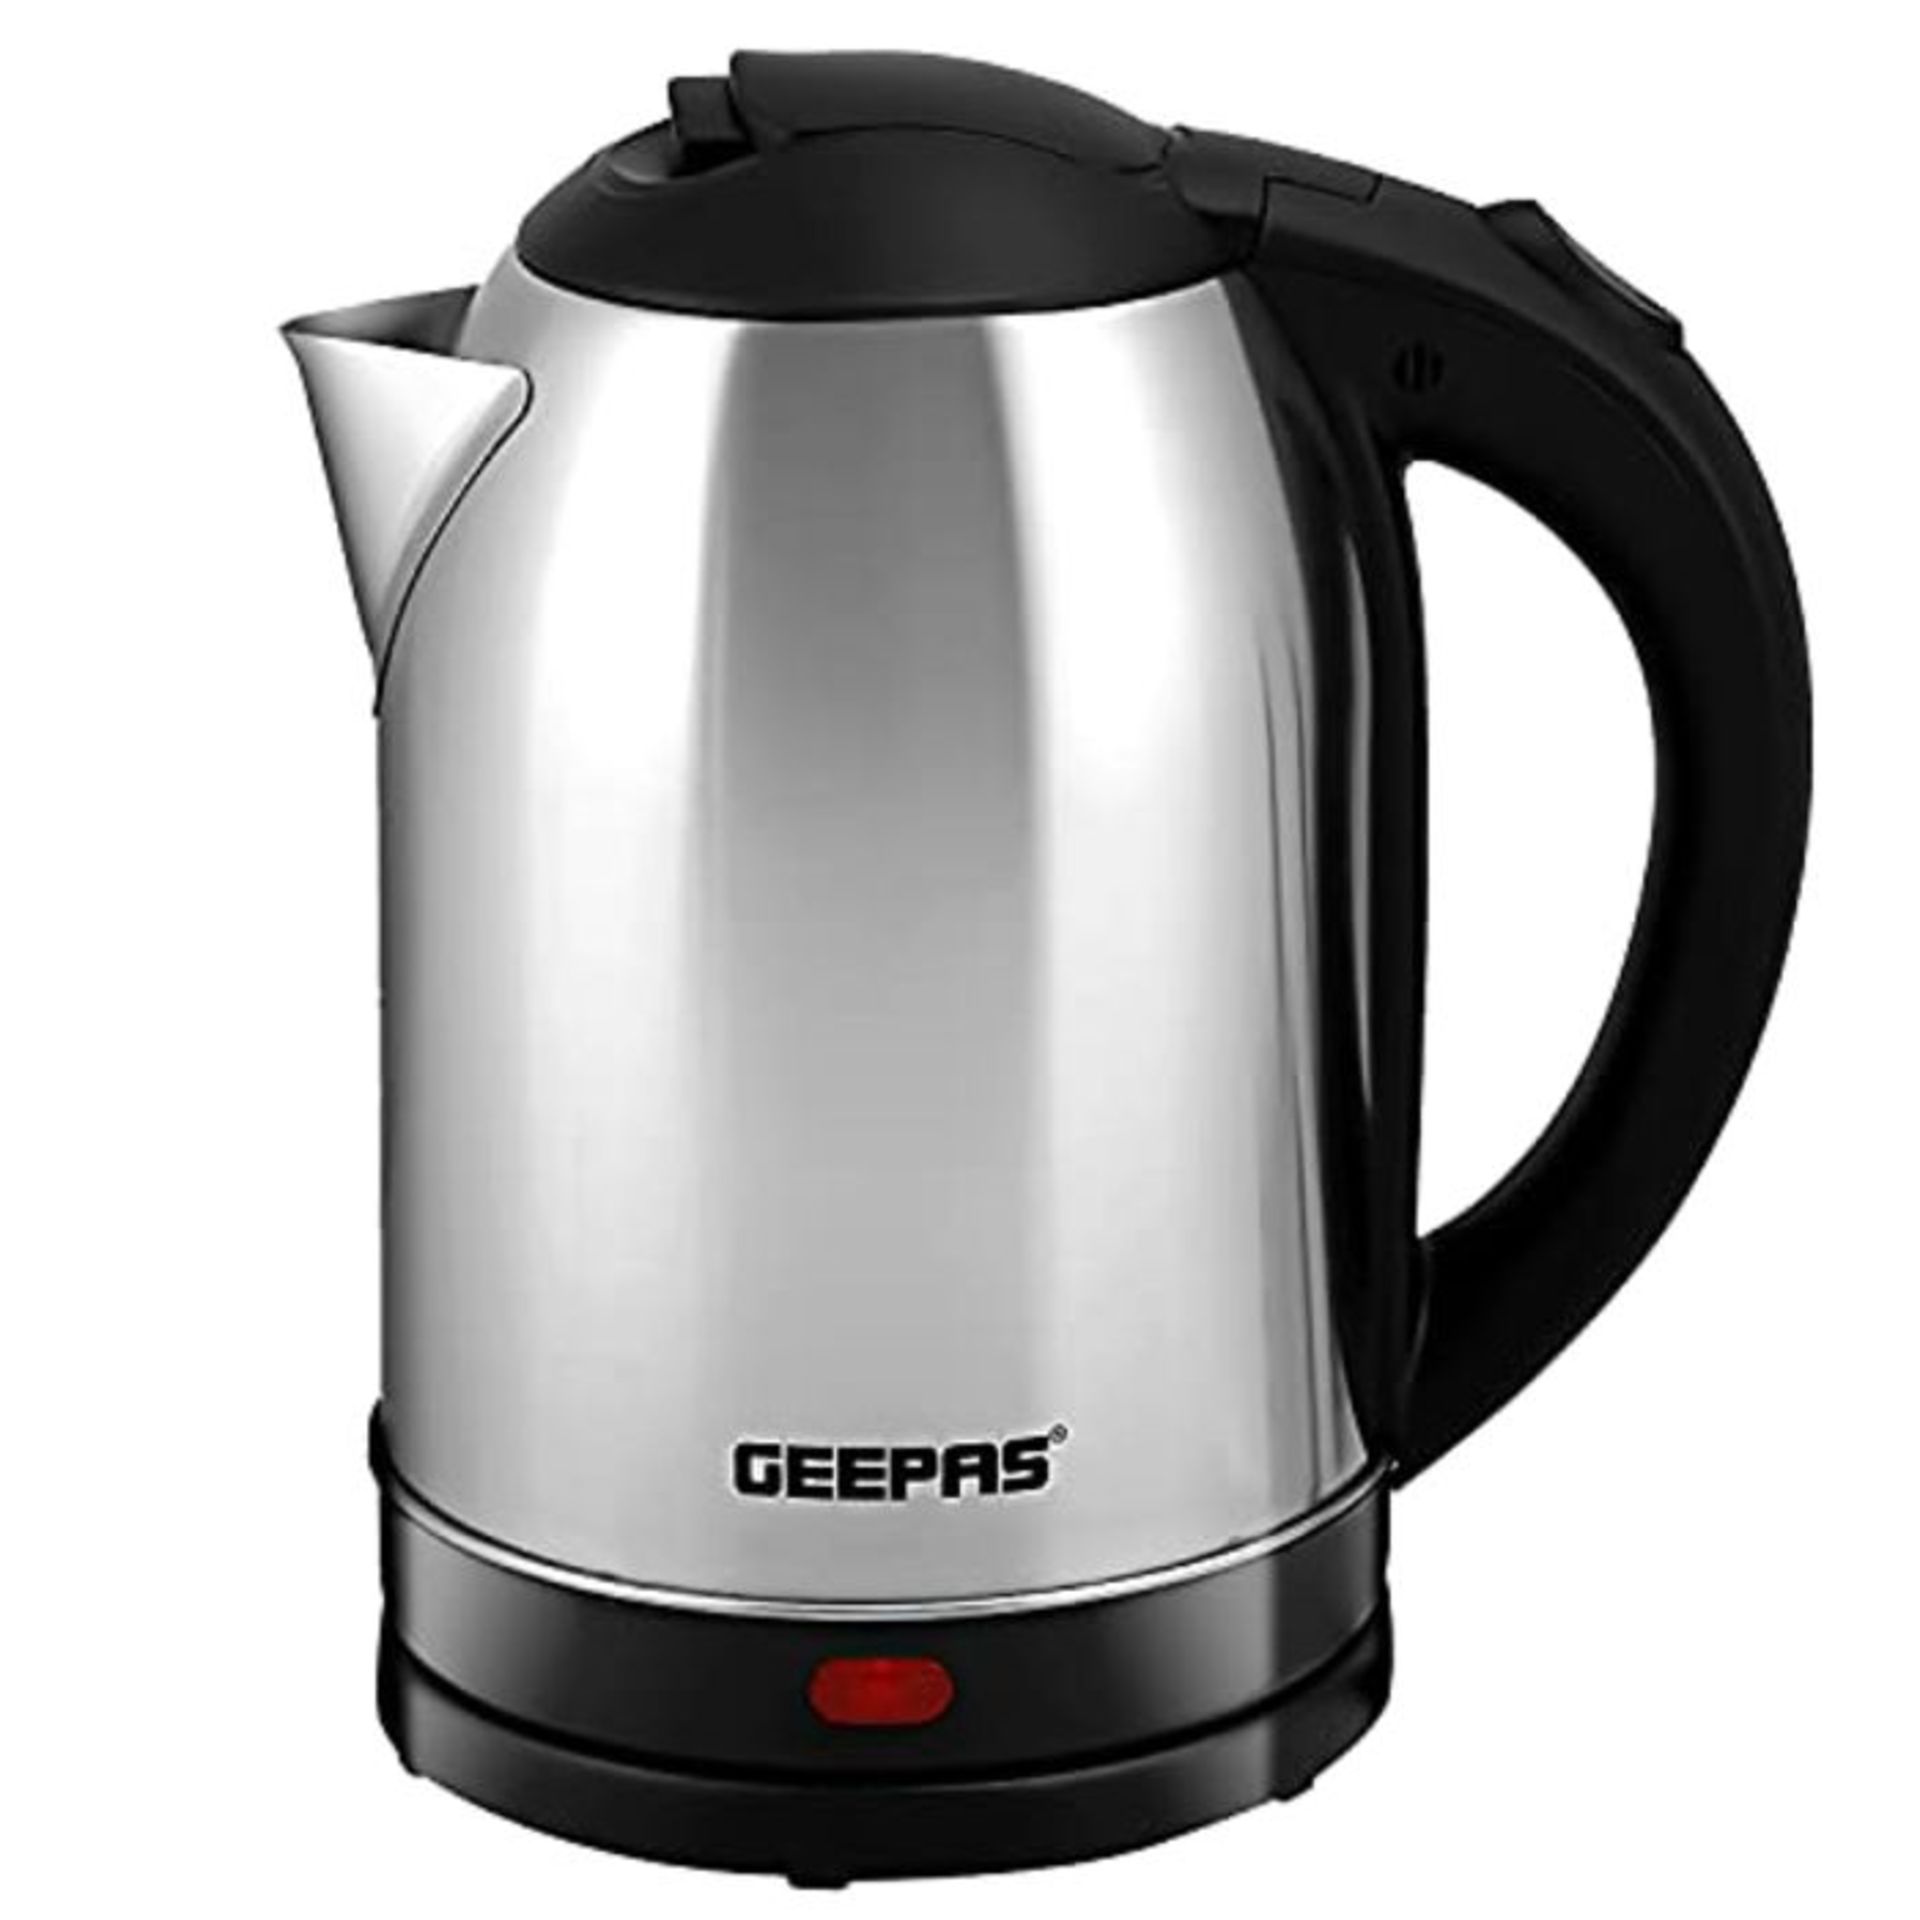 Geepas Electric Kettle, 1500W | Stainless Steel Cordless Kettle | Boil Dry Protection